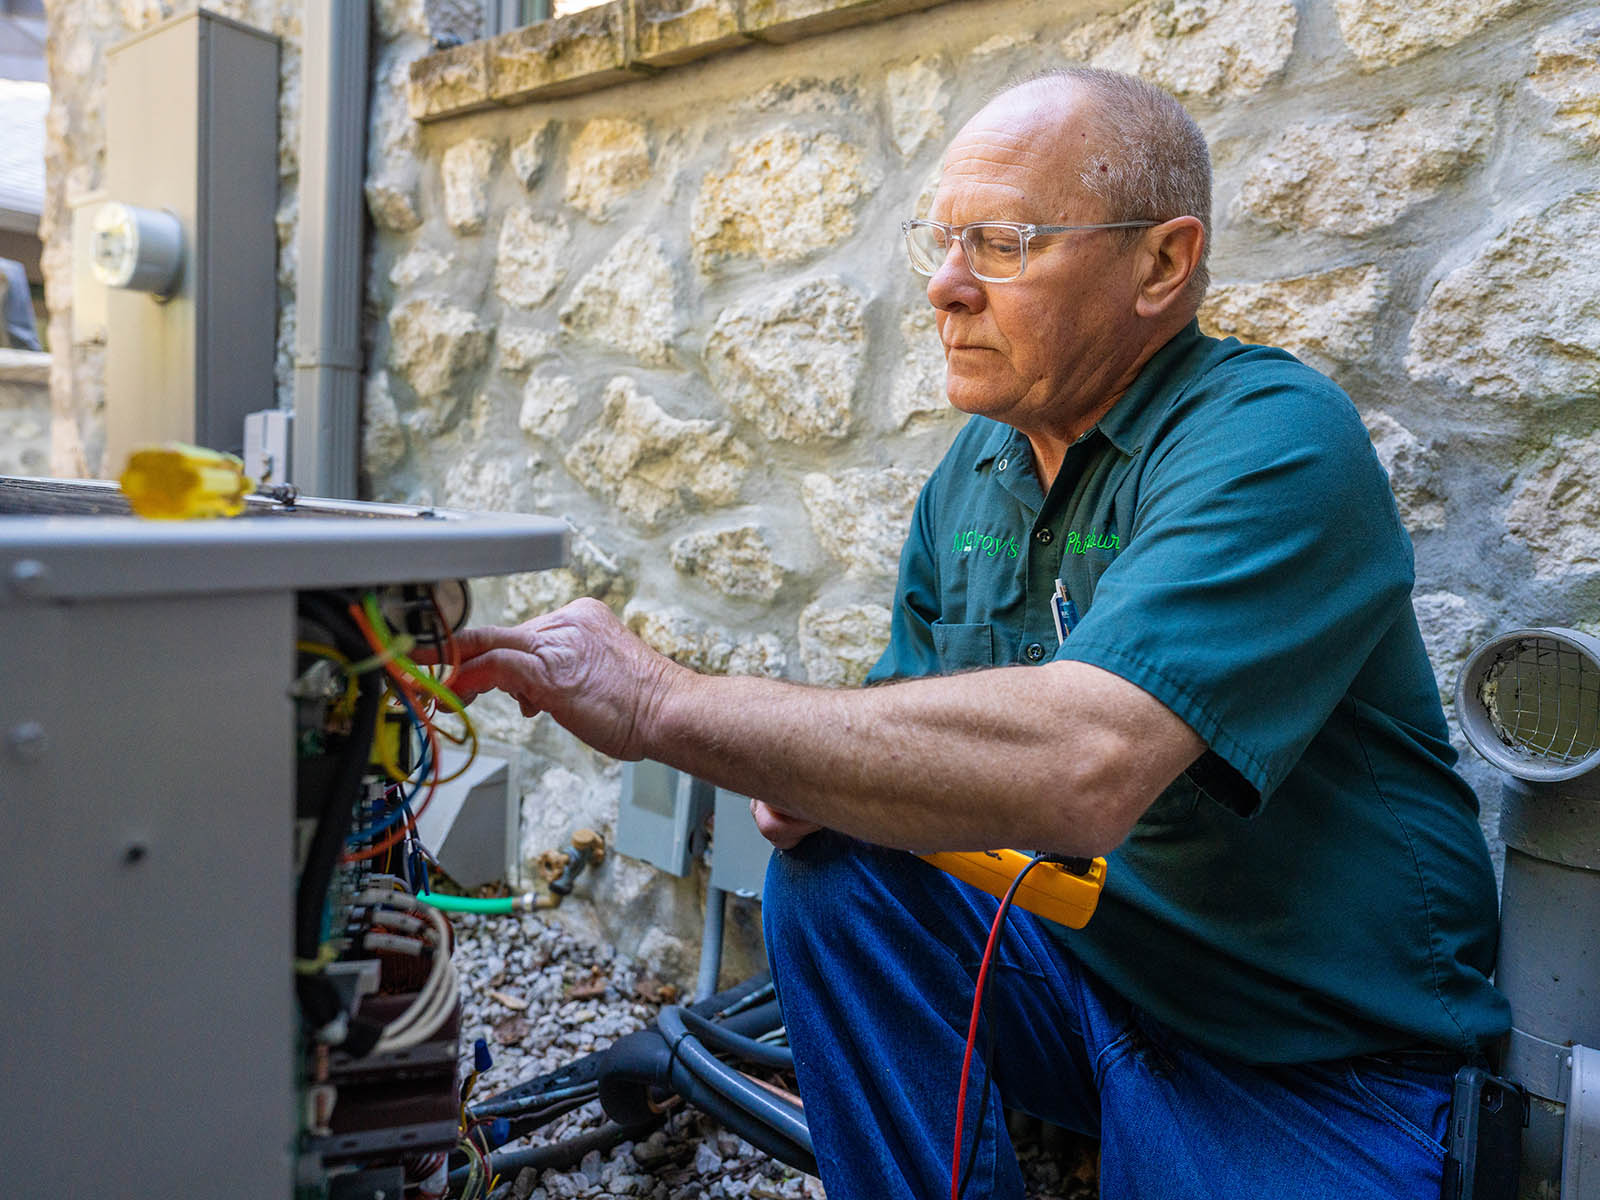 Phil Salsbury, McElroy’s HVAC service technician, fine tunes a residential customer’s air-conditioning condenser unit.